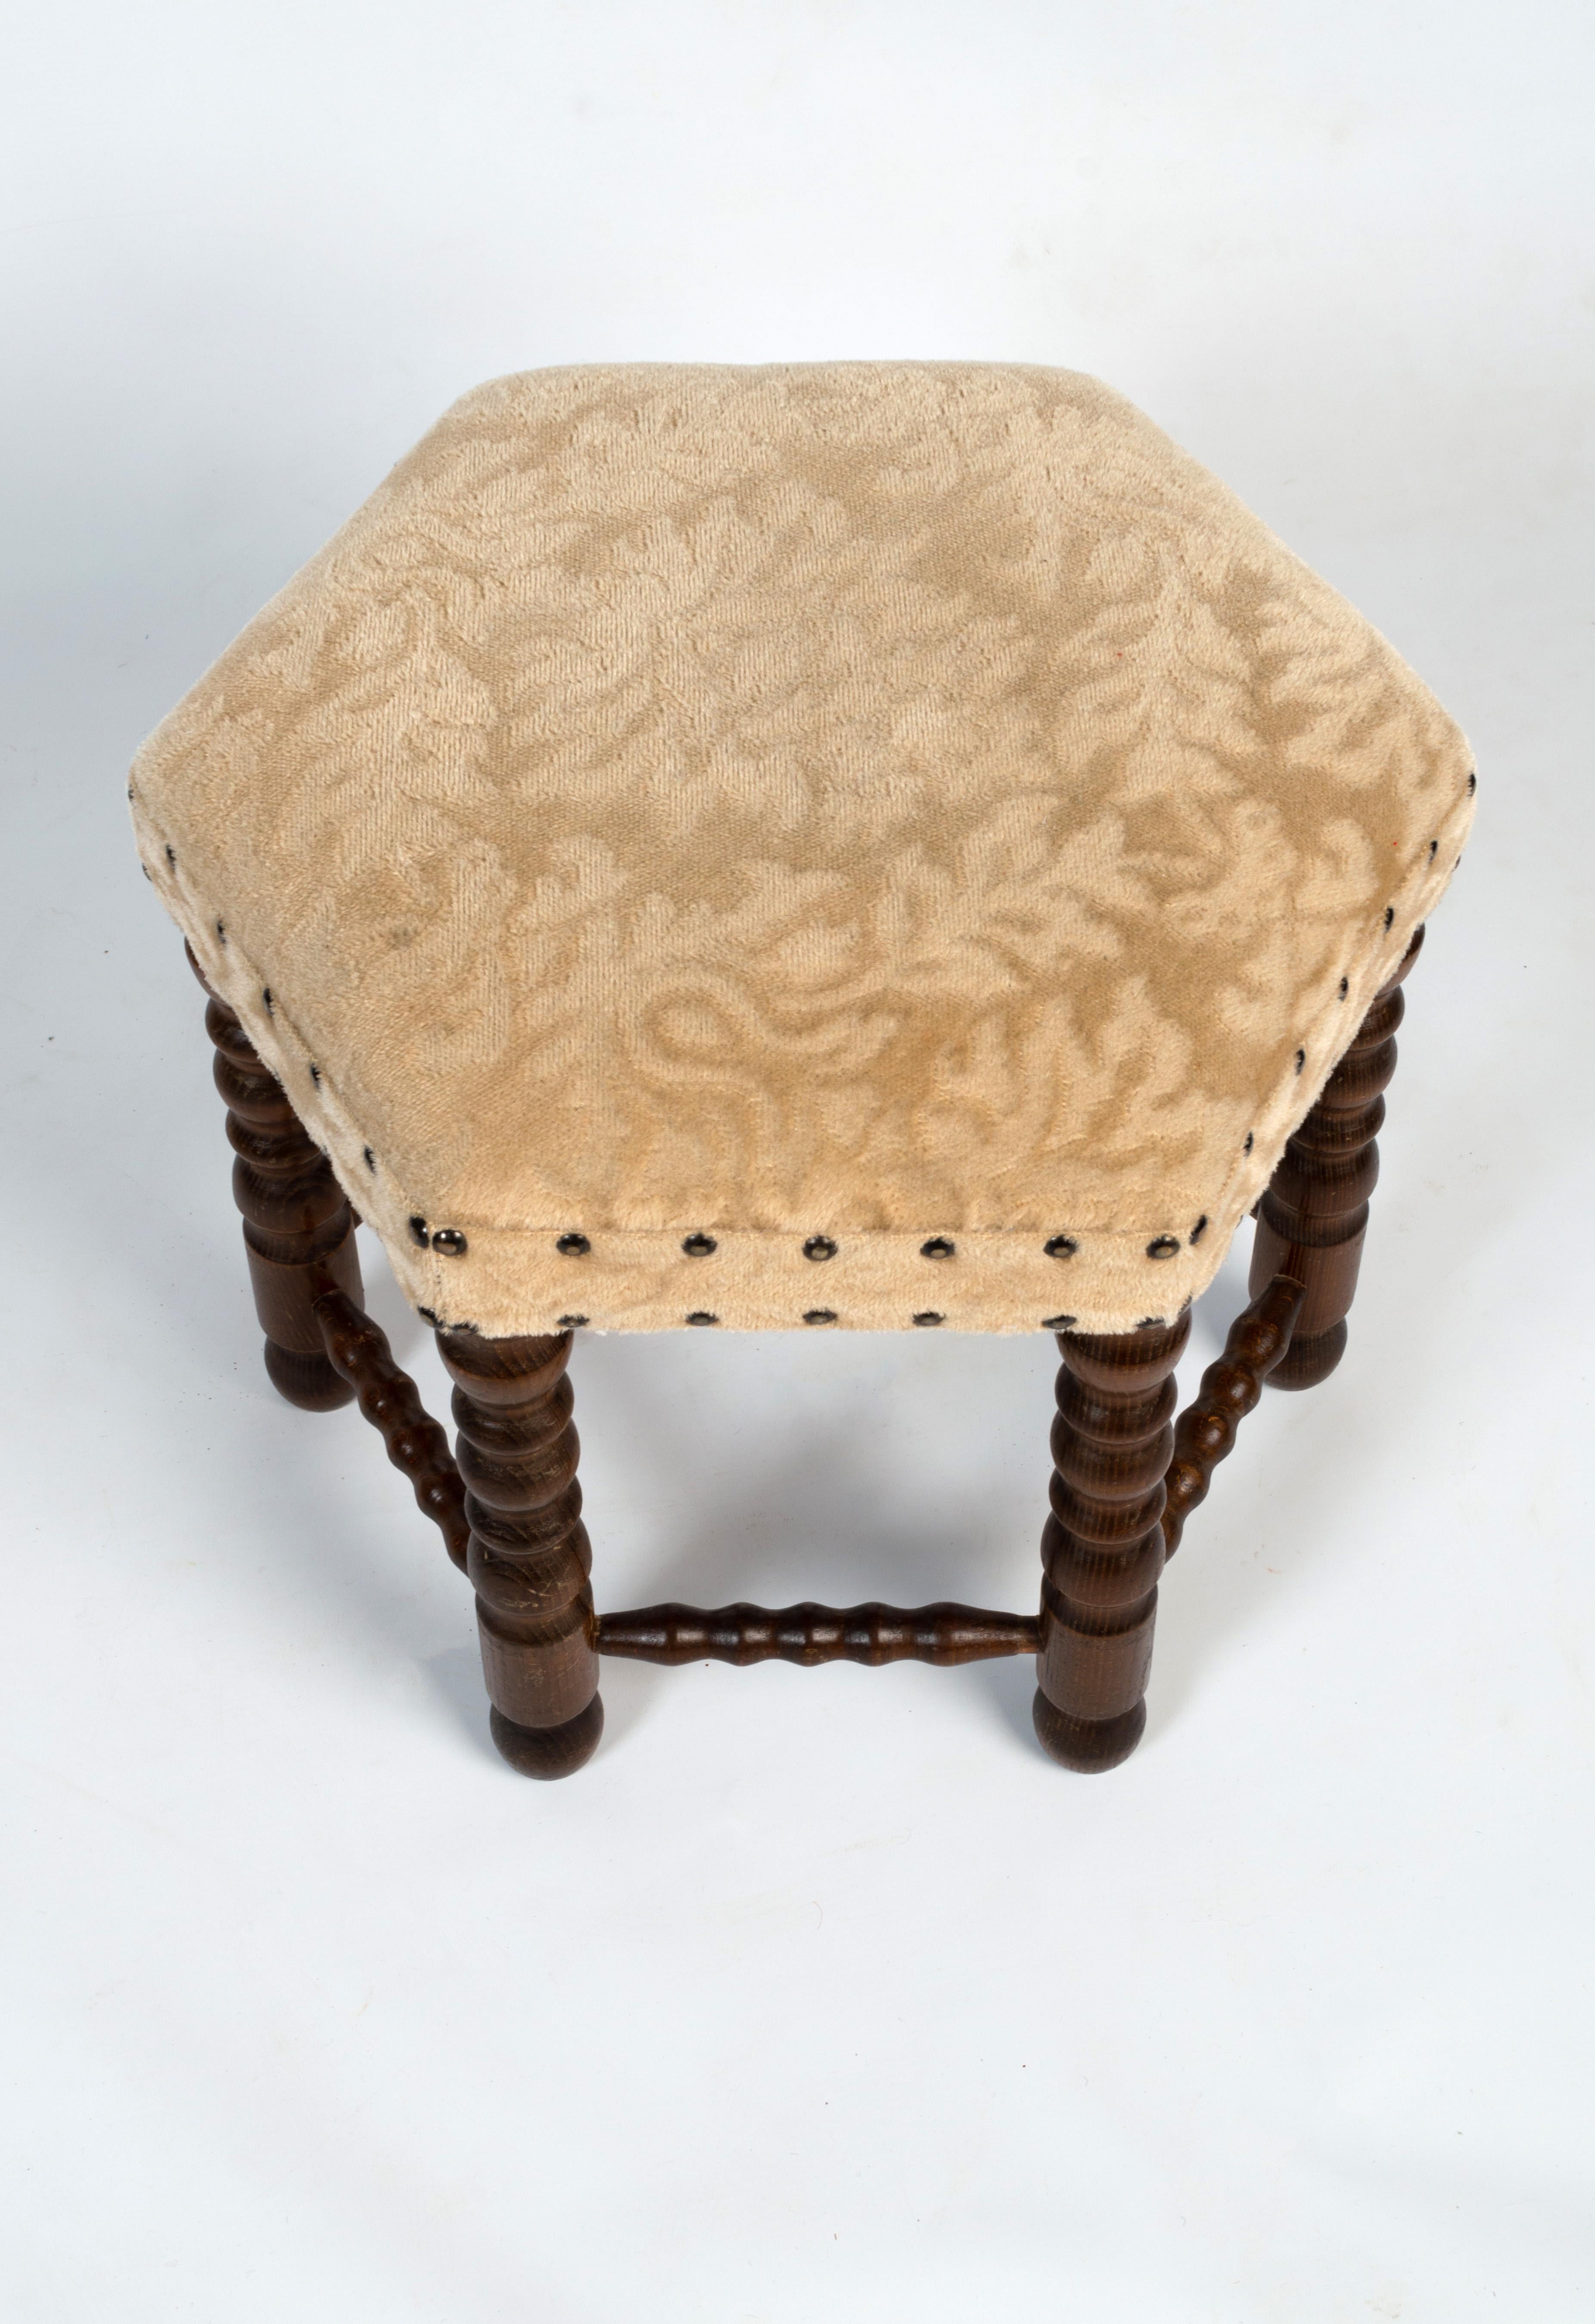 Antique English Bobbin Turned Hexagonal Upholstered Stool Ottoman circa 1920.

In good condition commensurate of age.